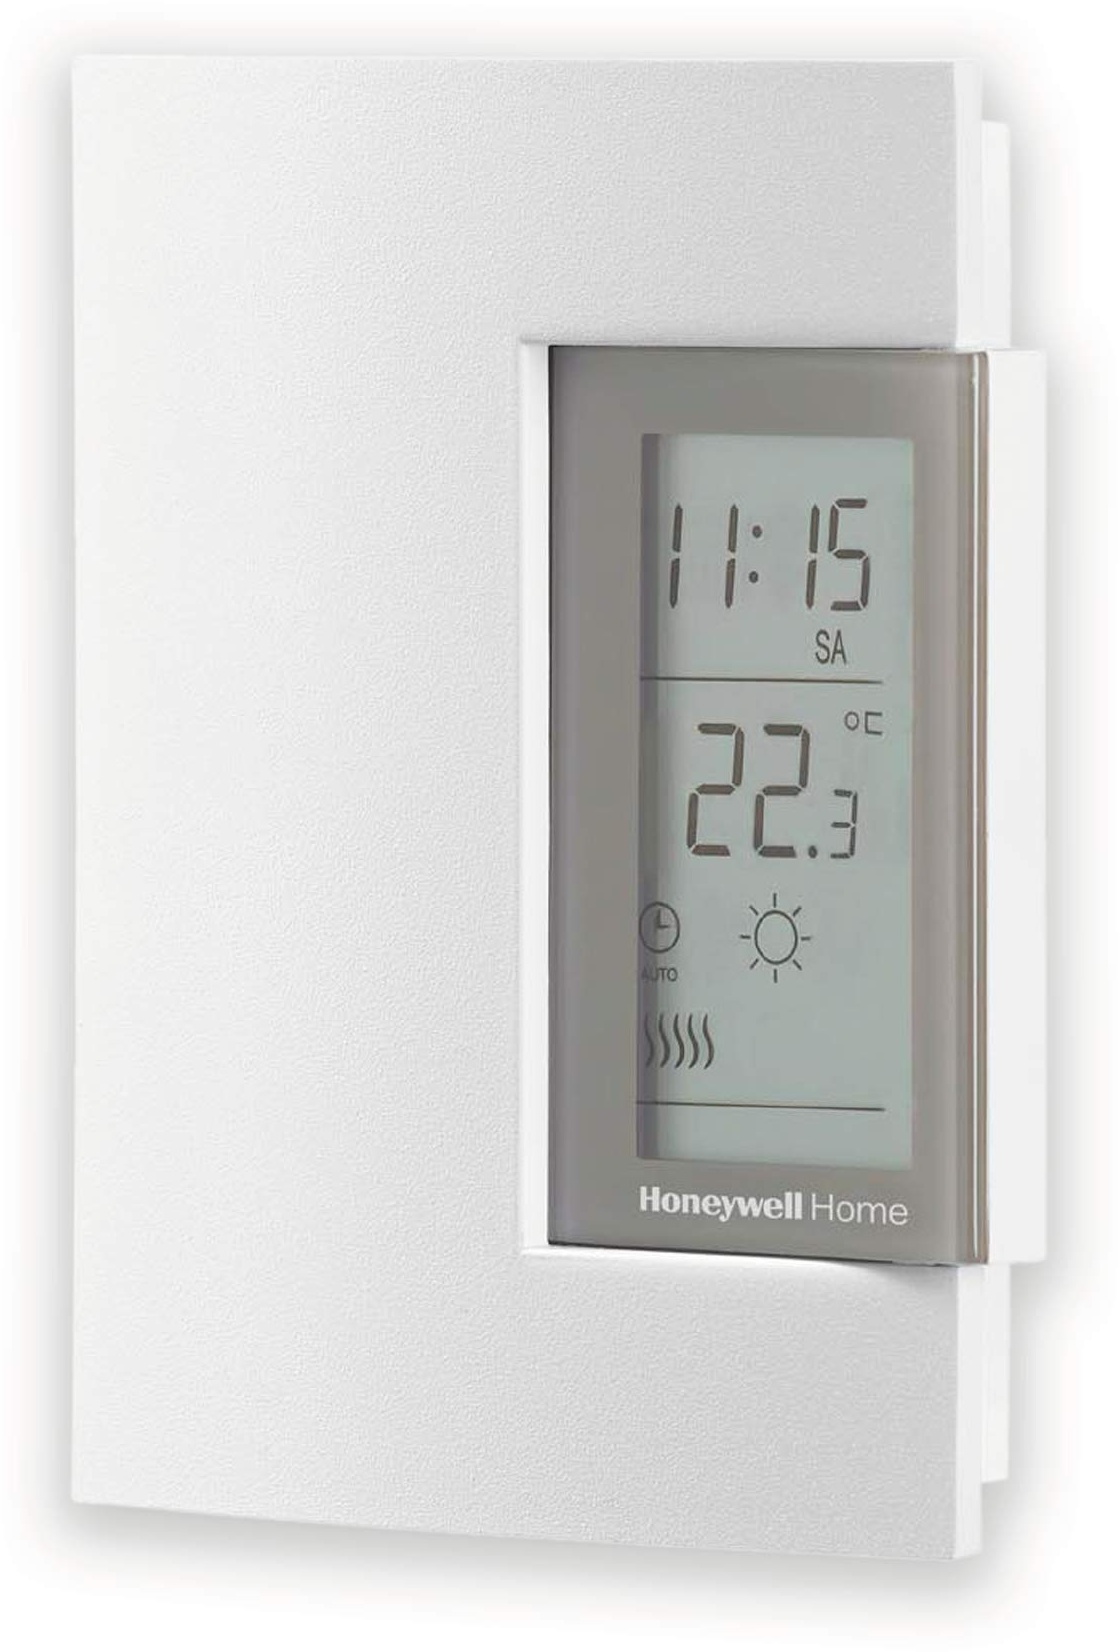 Honeywell Home T140C110AEU T140 7-Day Programmable Wired Thermostat, White